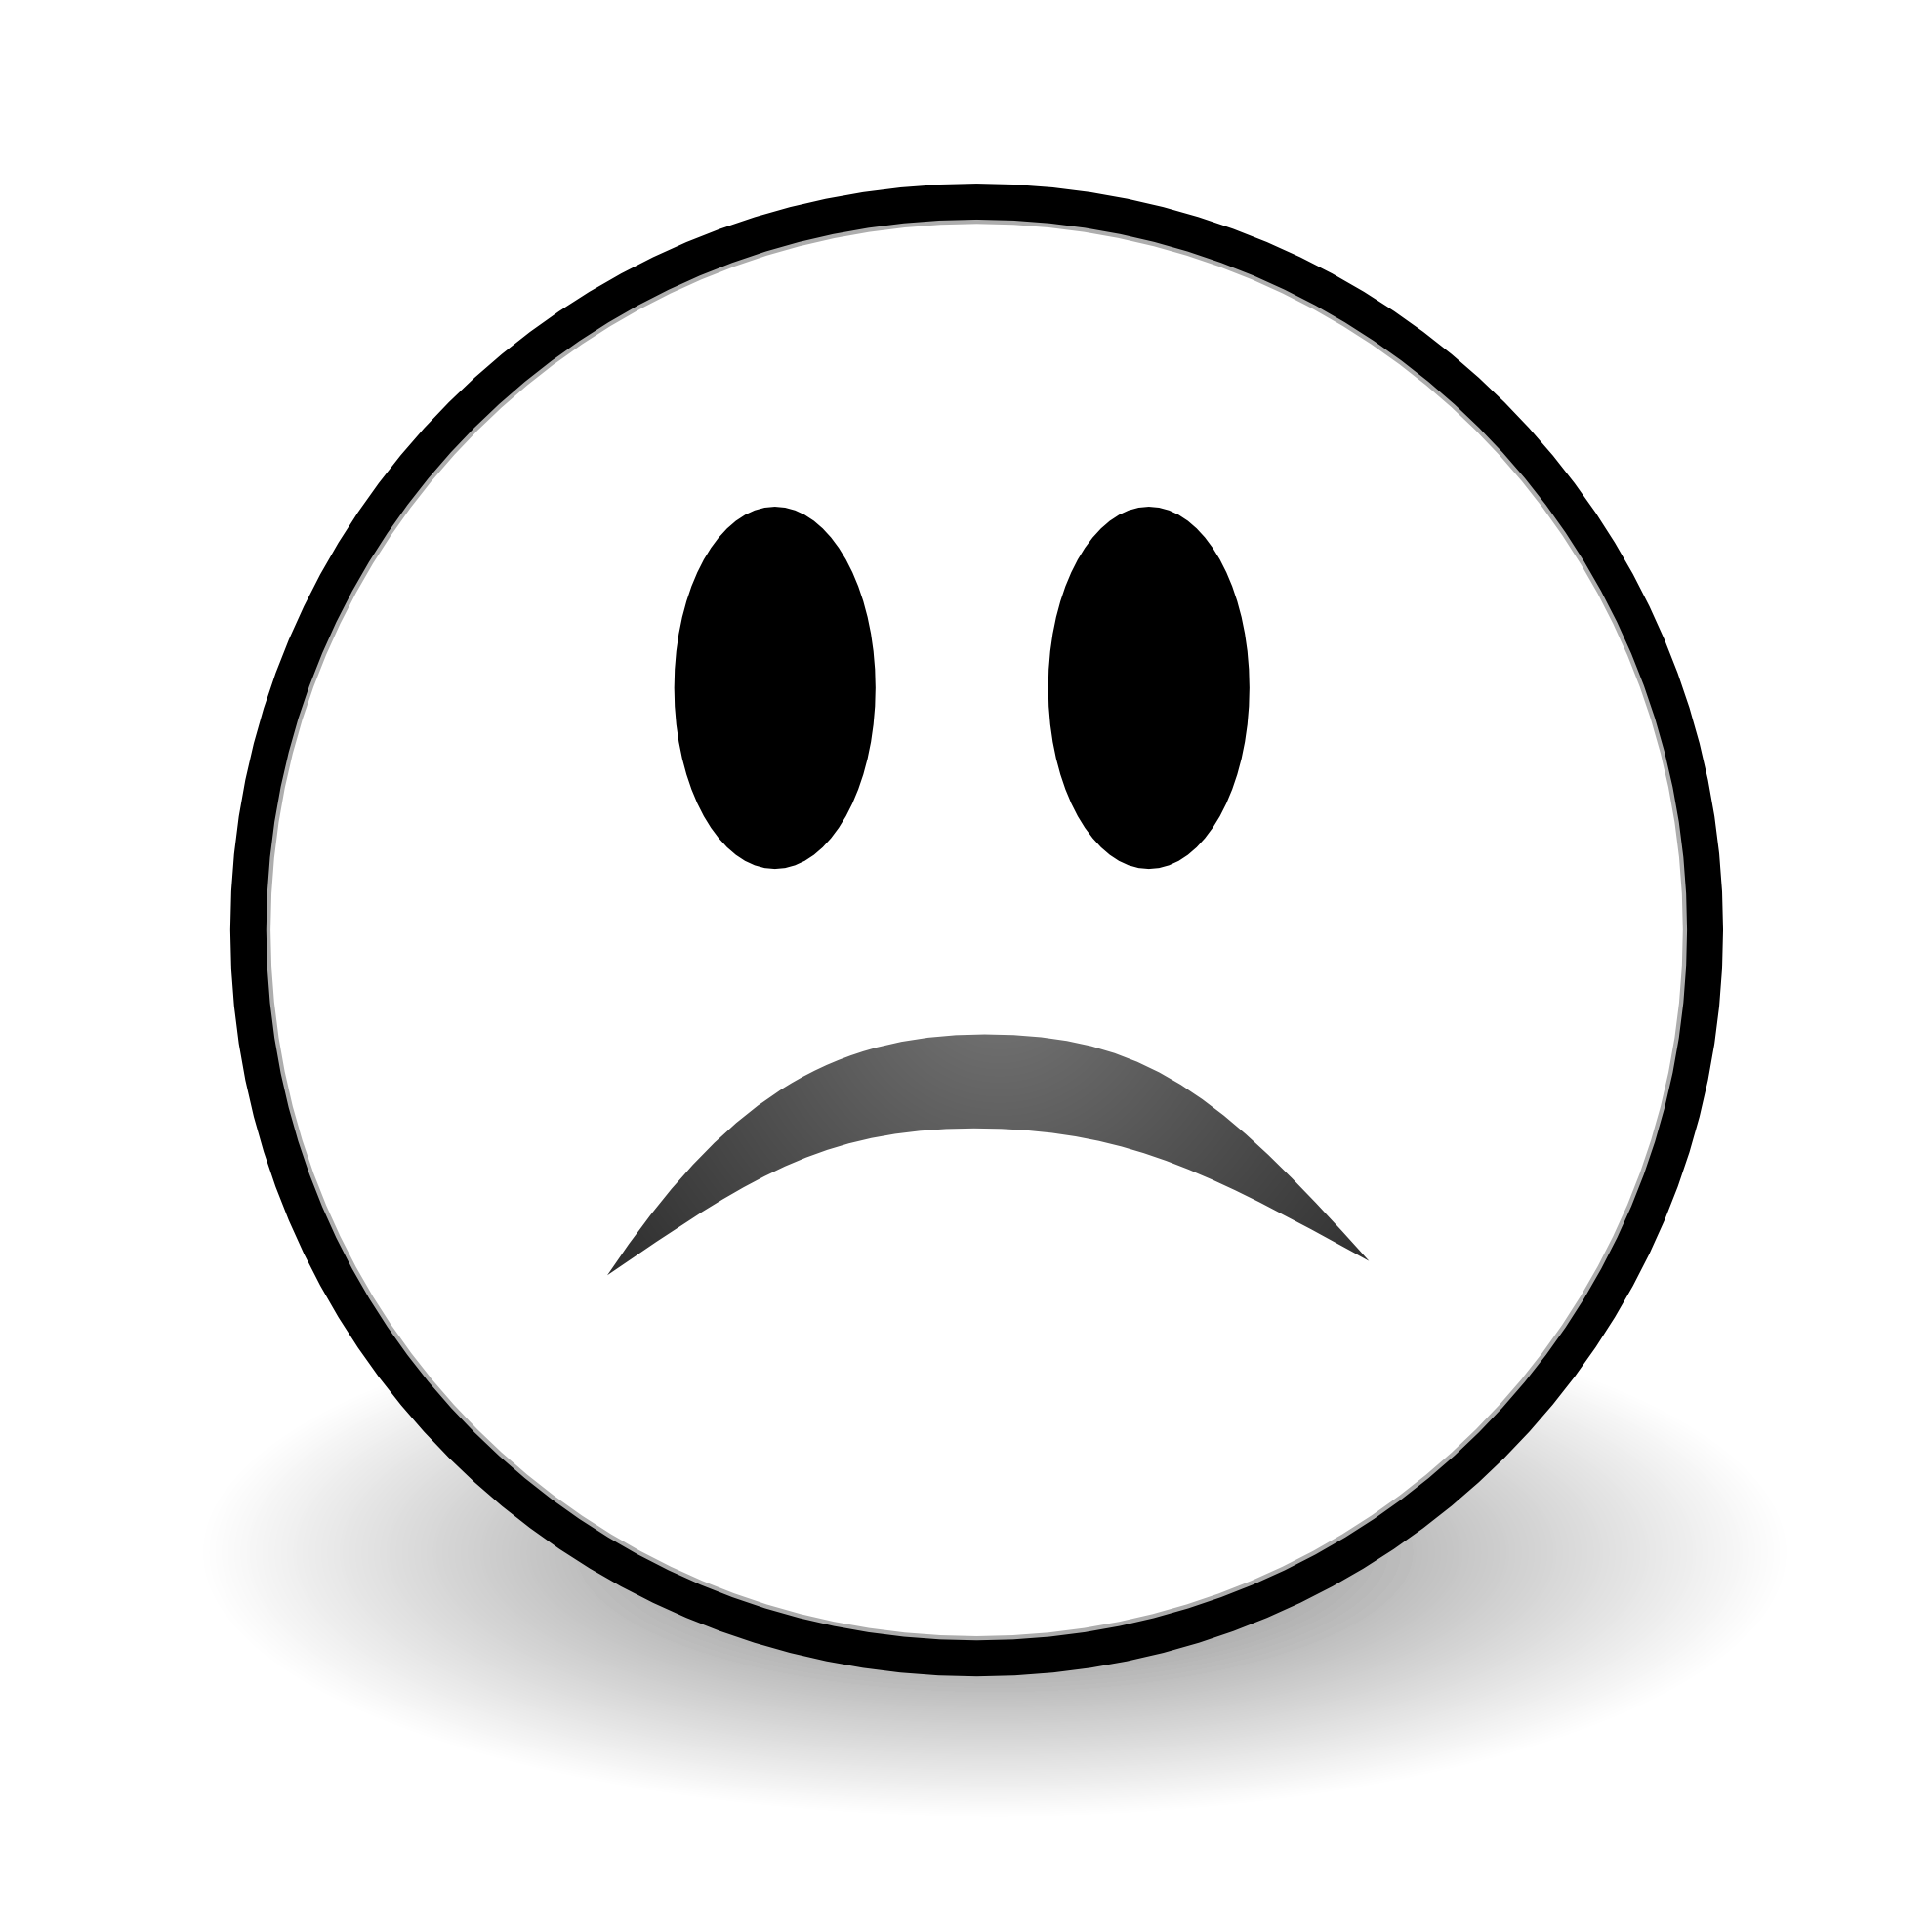 Happy and sad face clip art free clipart images 3 - Cliparting.com